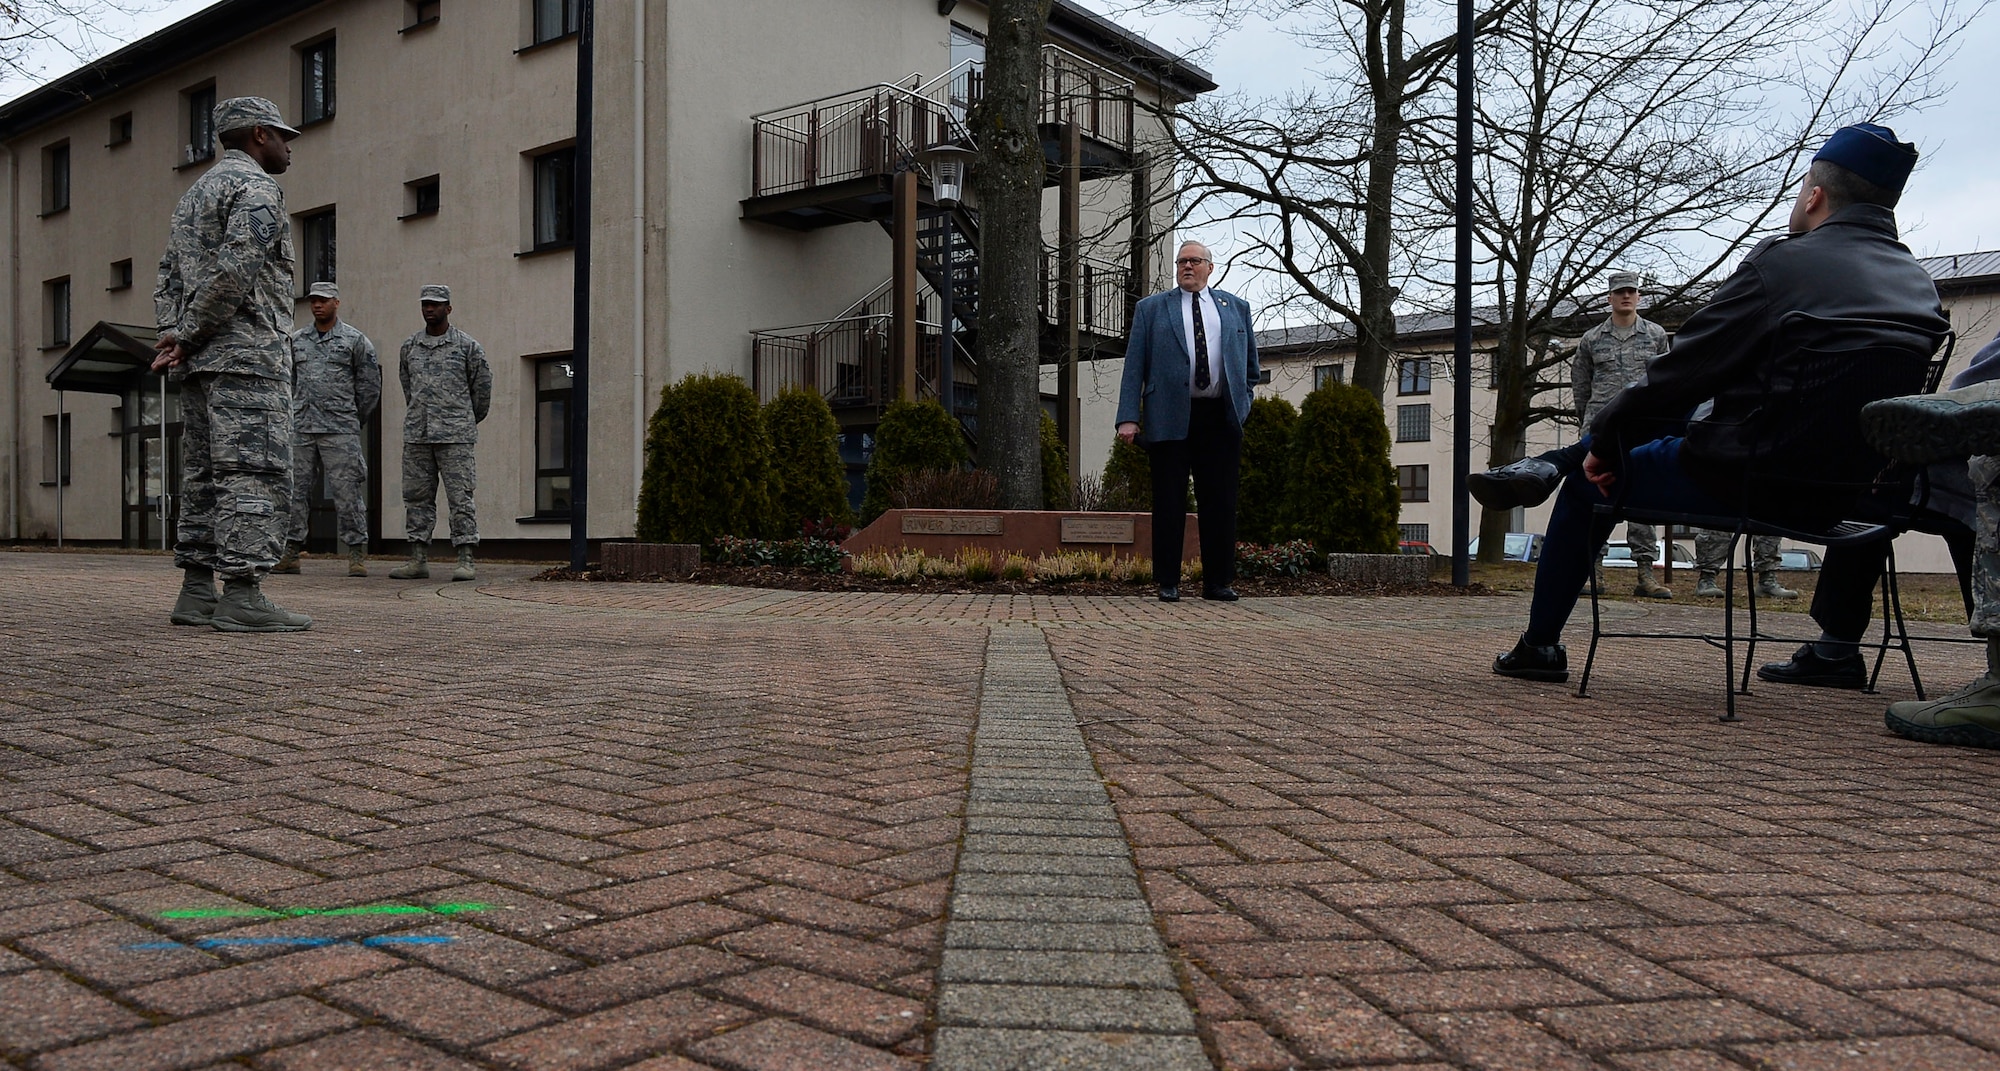 Col. Swede Seagren, retired, a Vietnam War veteran and original member of the Red River Rats Fighter Pilots Association, gives a speech in front of the Red River Memorial monument on Ramstein Air Base, Germany, Feb. 17, 2017. The monument serves as a reminder of those who lost their lives in the Vietnam War. The 786th CES repaired the monument in January and held a memorial service to mark its re-dedication. (U.S. Air Force photo by Airman 1st Class Joshua Magbanua)